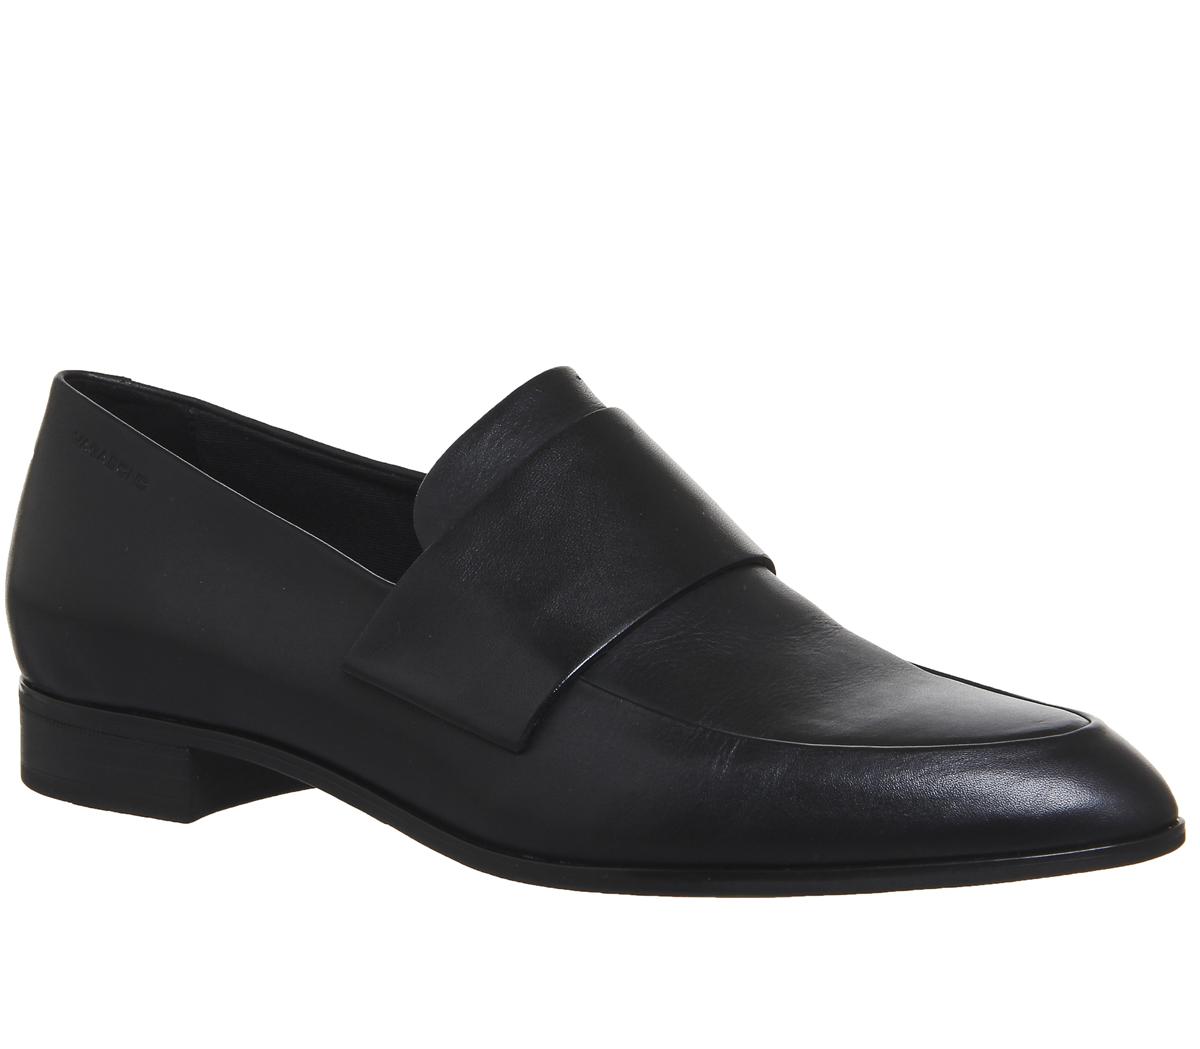 Vagabond Leather Frances Loafers in Black - Lyst